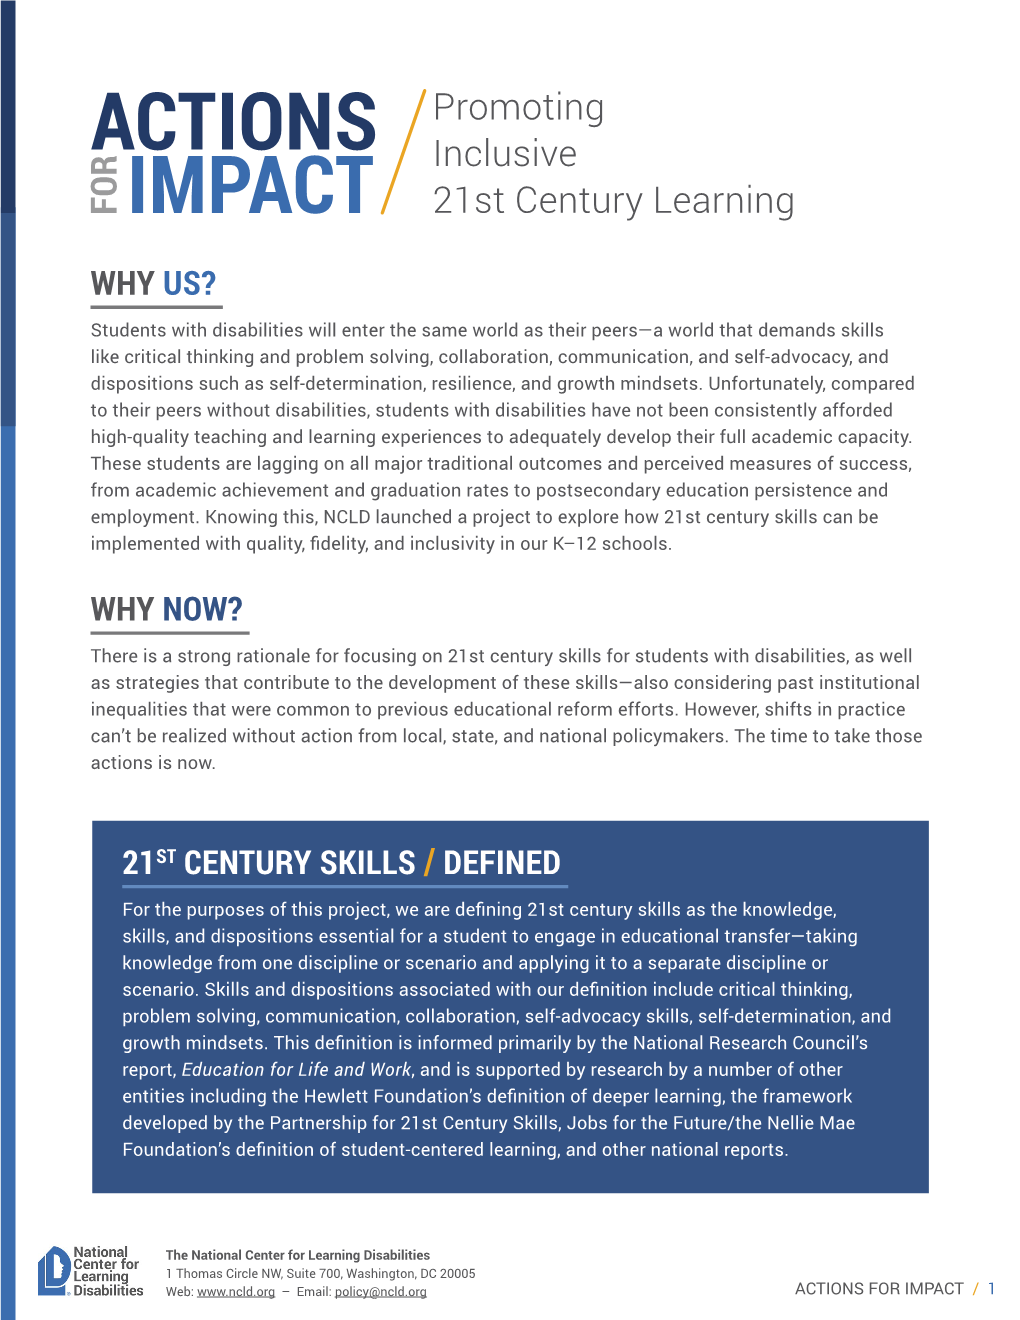 Actions for Impact: Promoting Inclusive 21St Century Learning